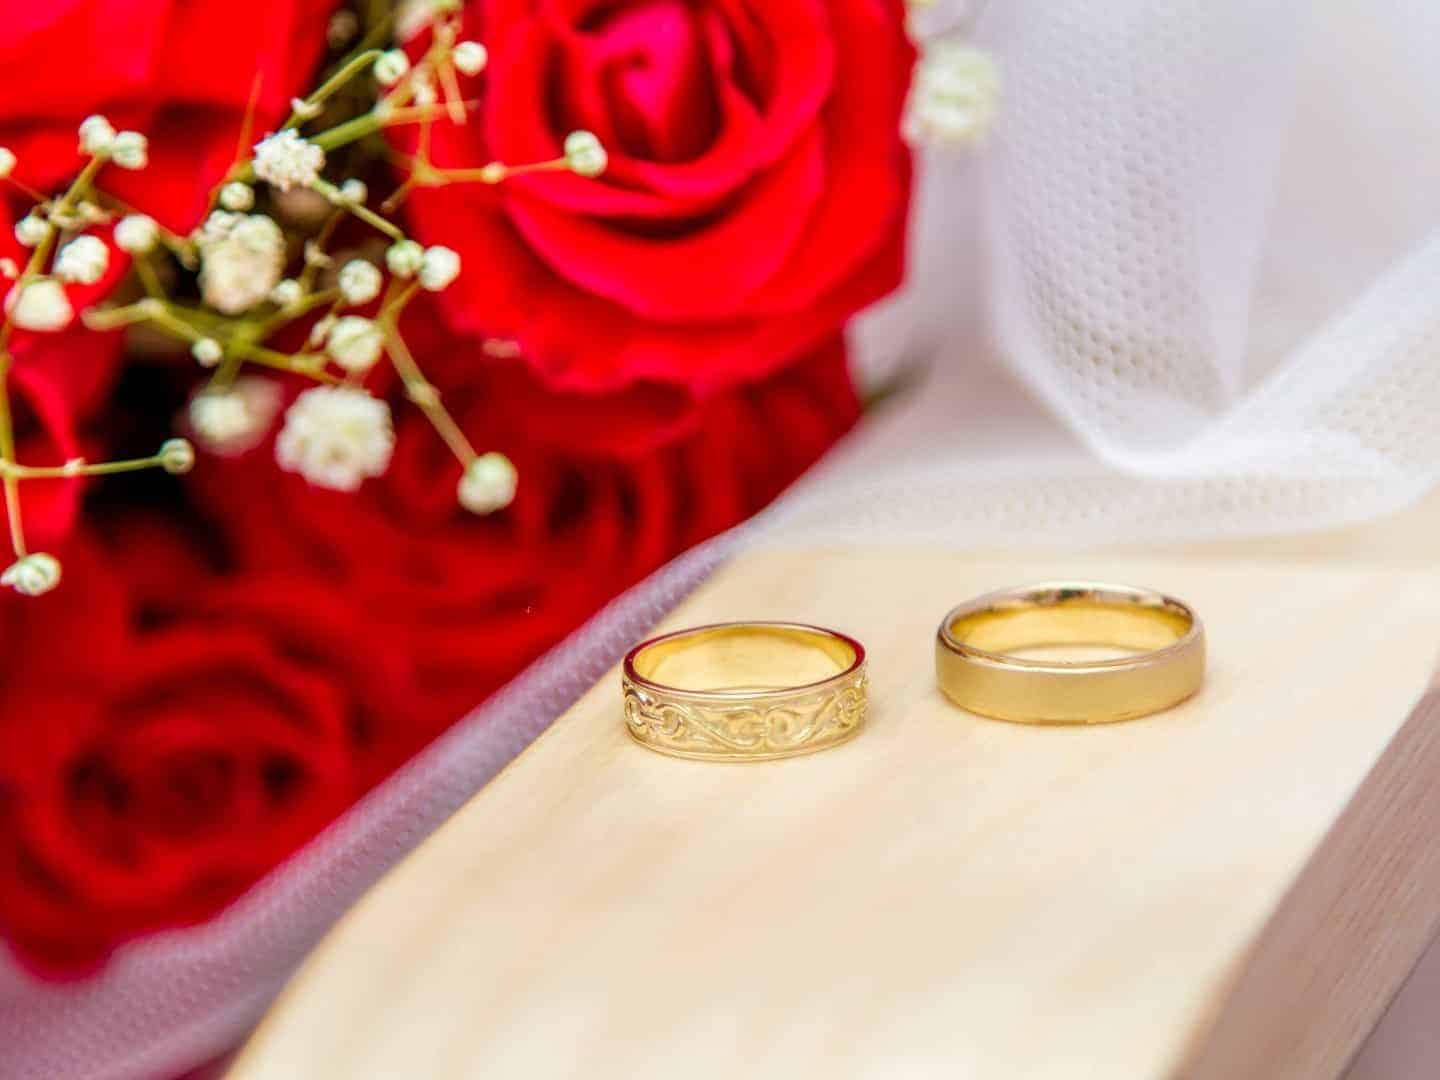 Jewish wedding - Wedding rings of bride and groom near a bouquet of red roses. Close-up